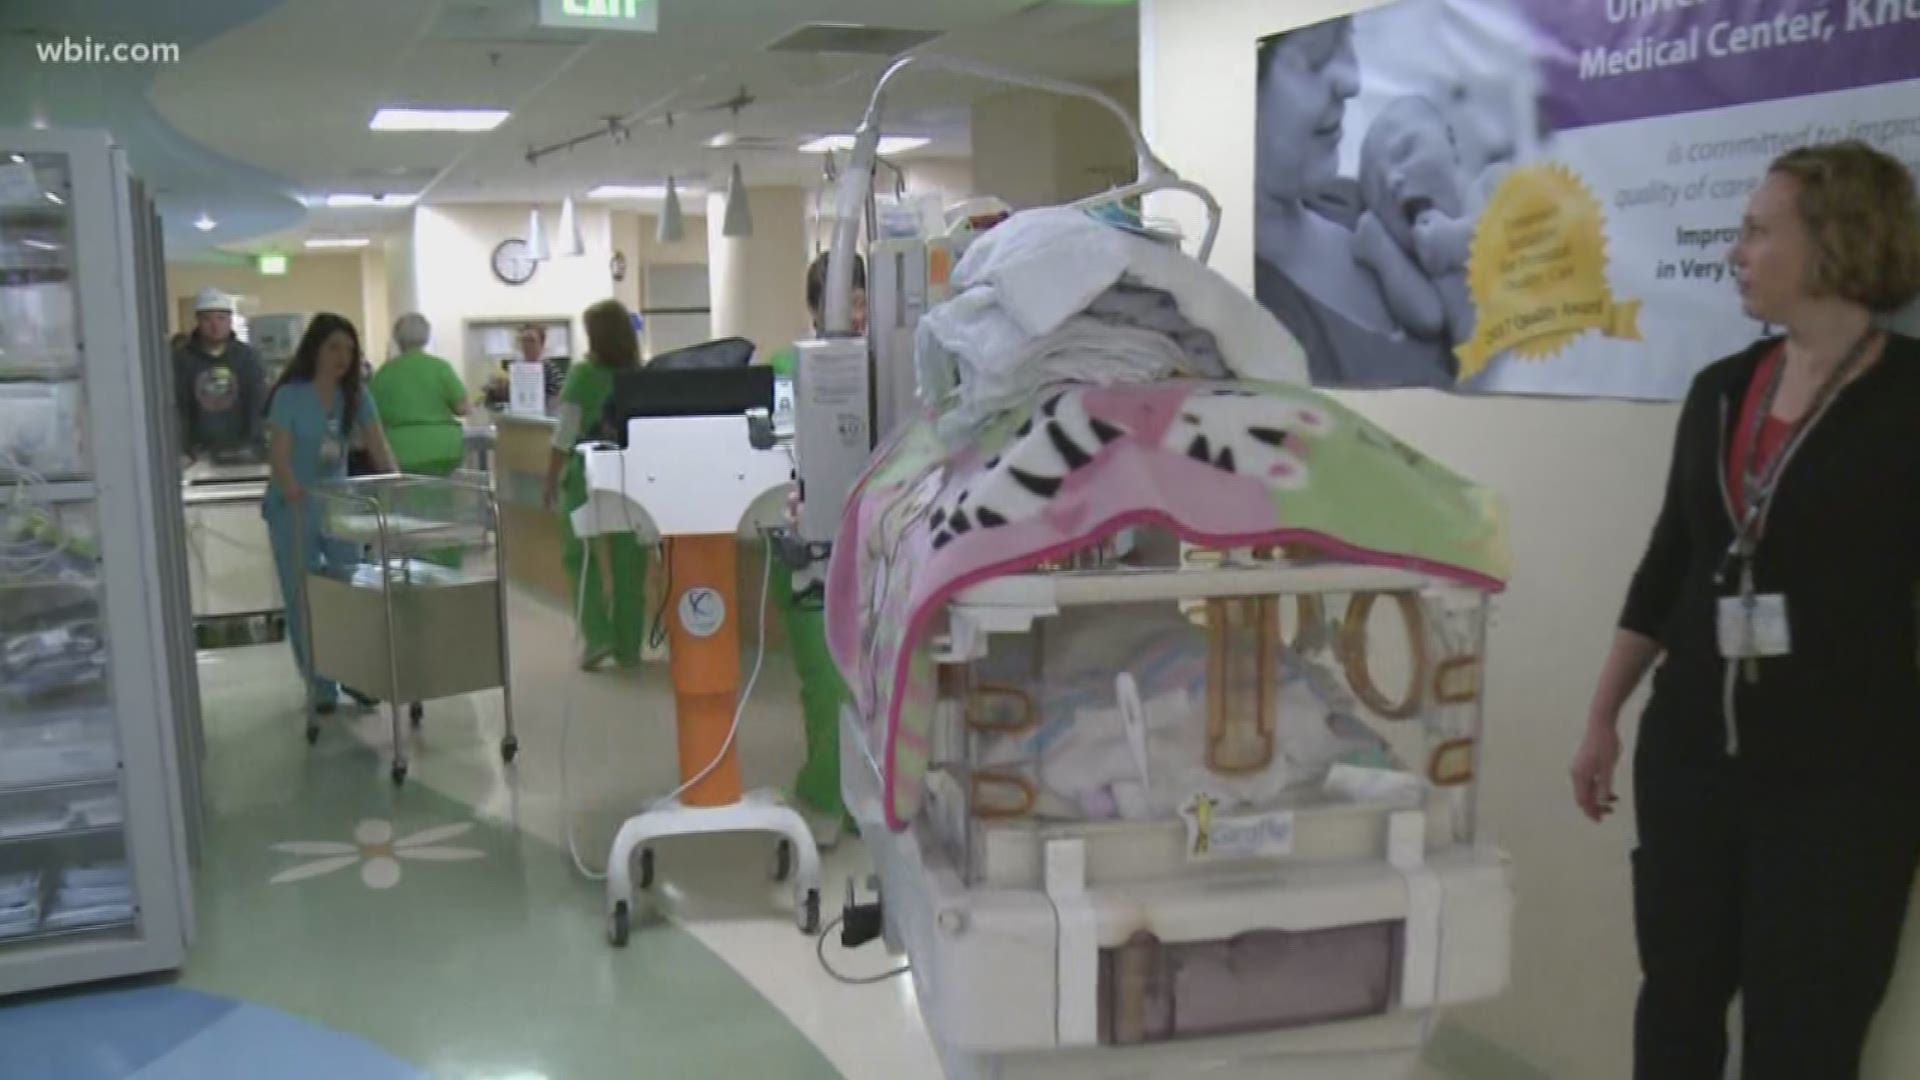 The hospital finished renovations to create more space for NICU patients and they moved in today. The rooms are more private and have space for parents to stay with their little ones.